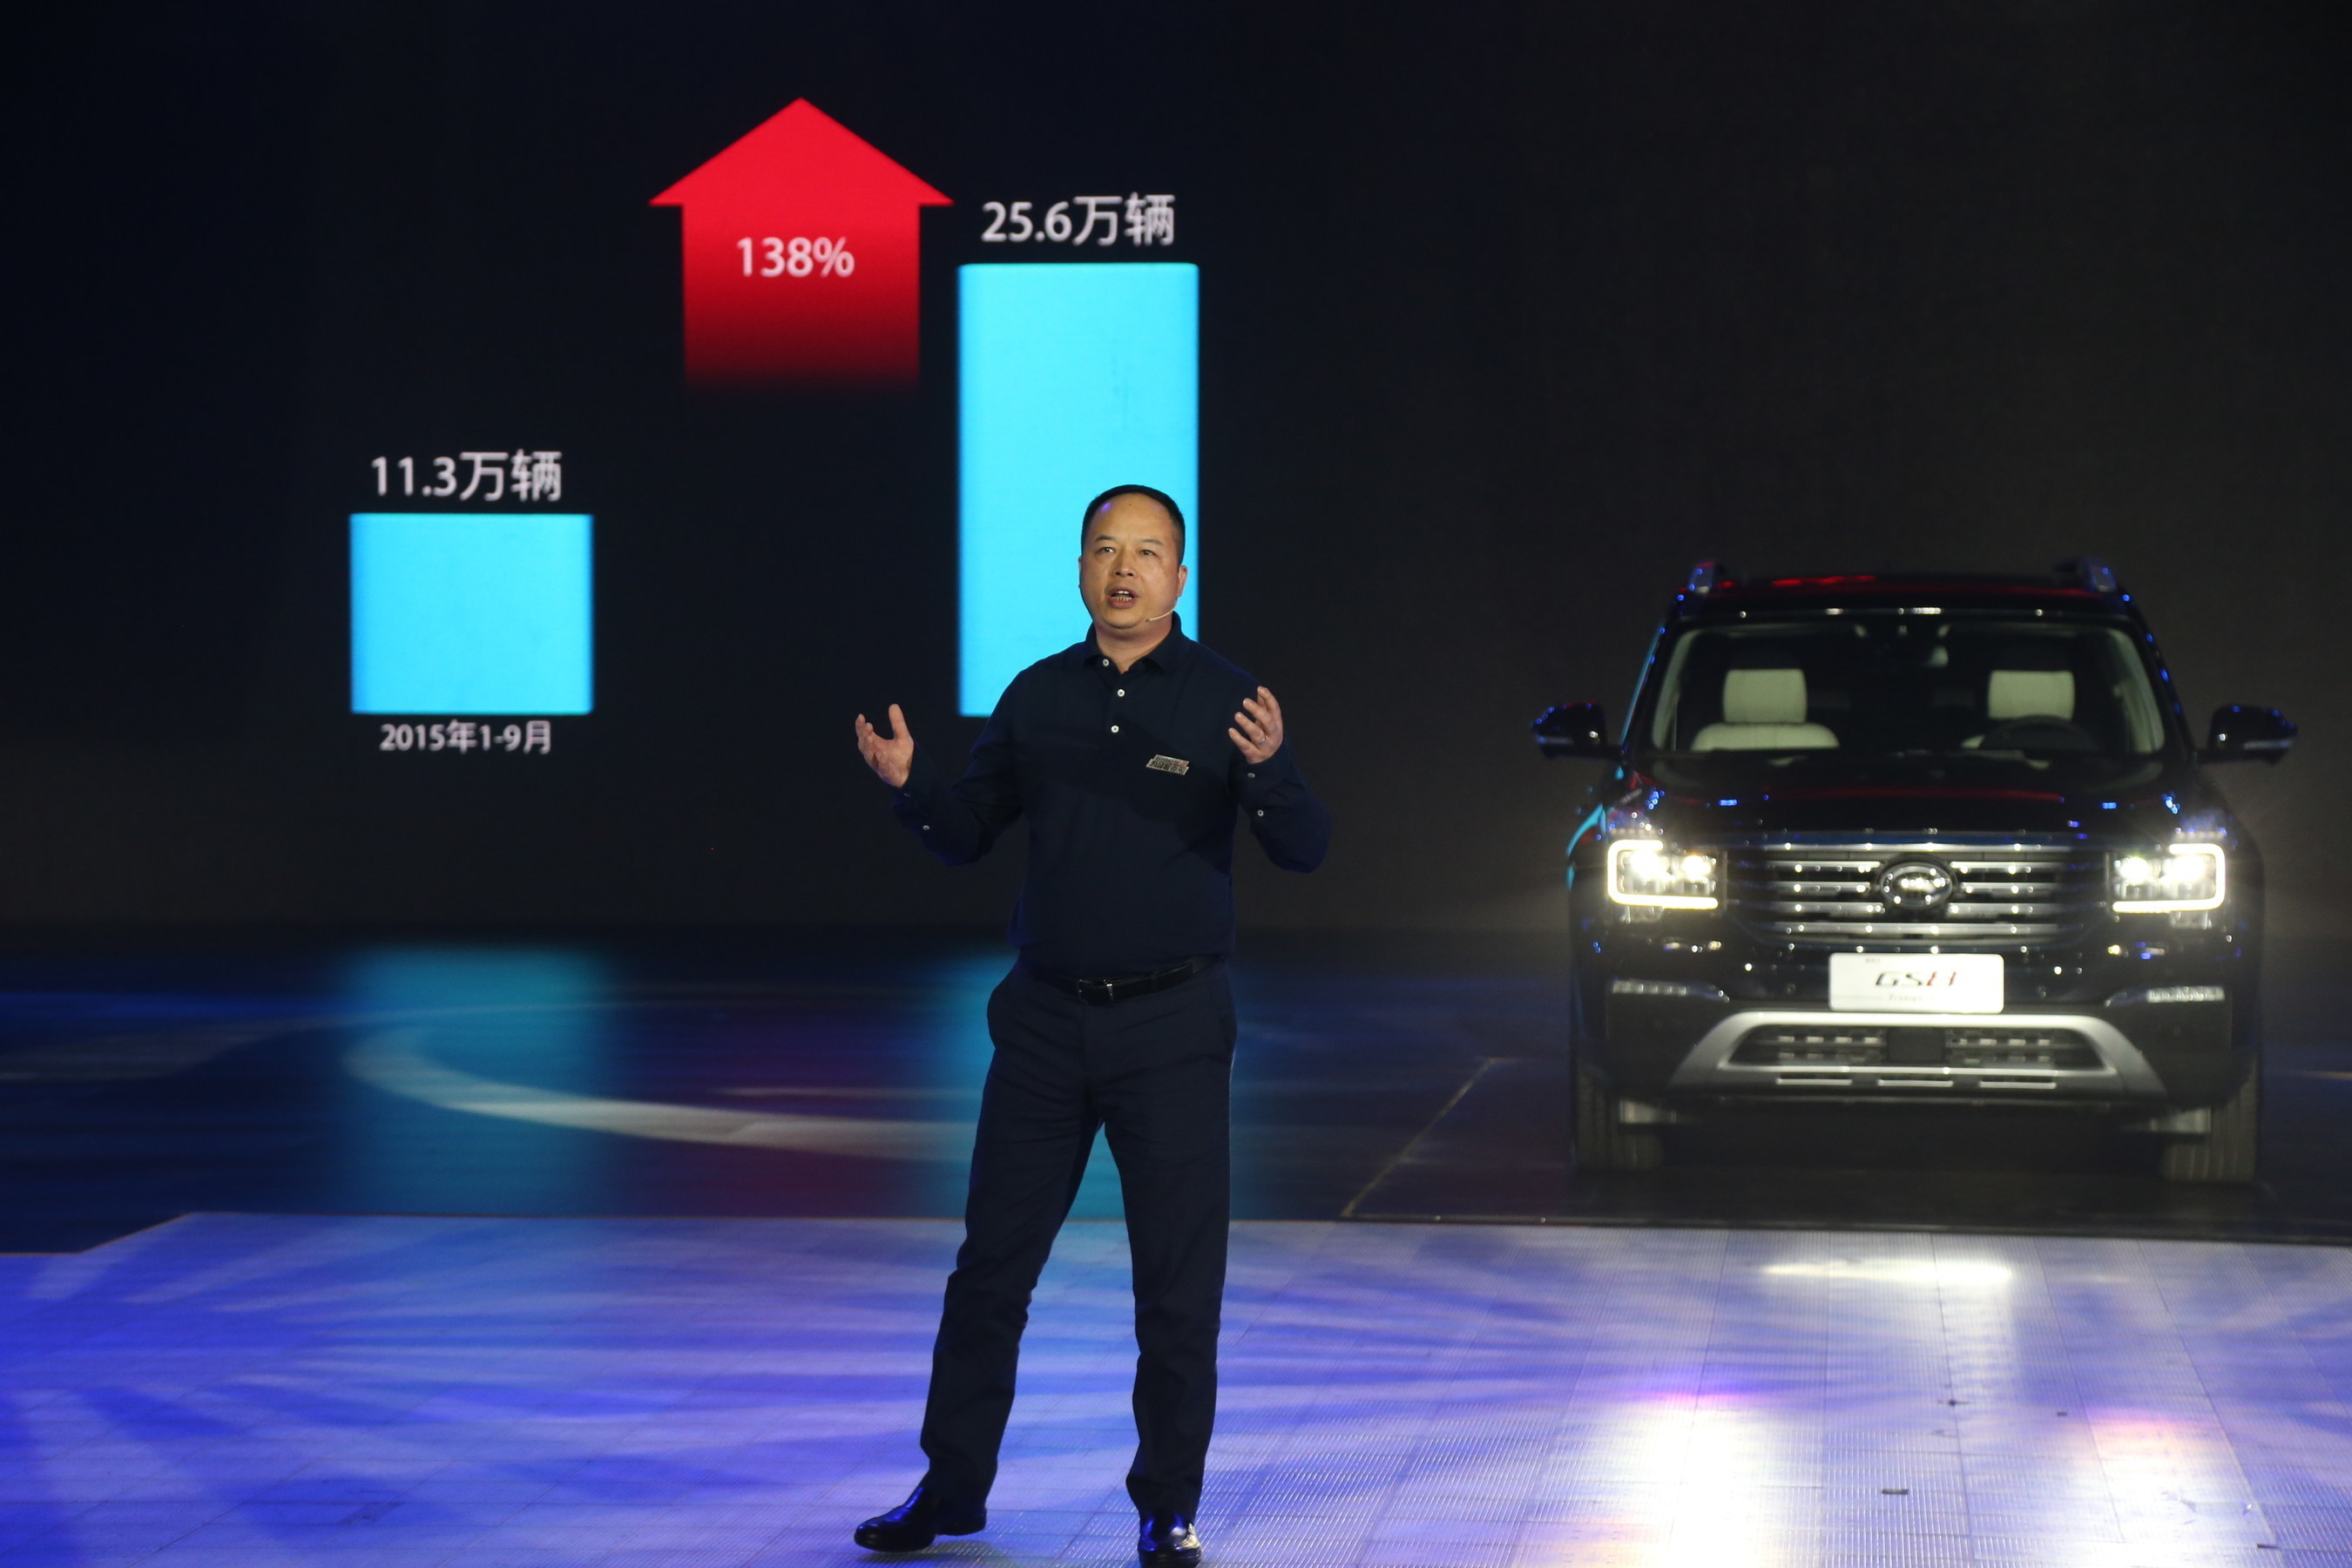 General Manager of GAC Motor Yu Jun revealed the price of GS8